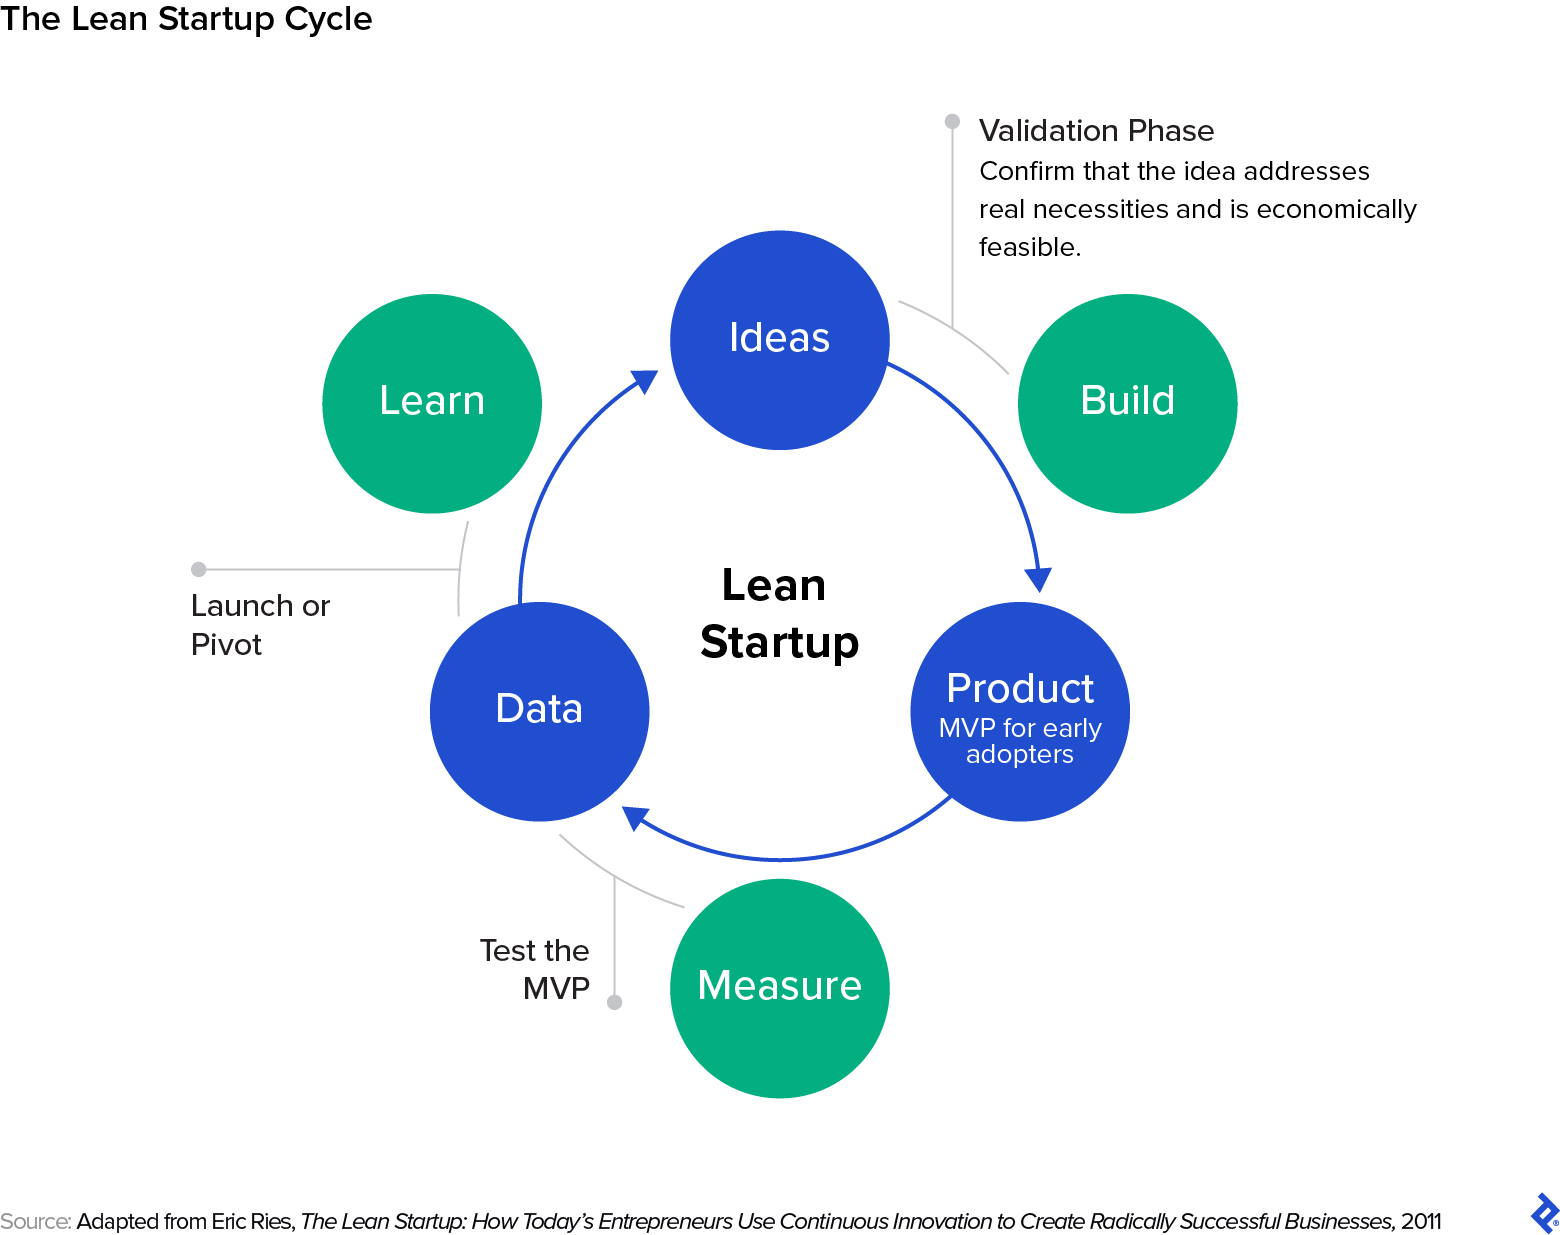 The Lean Startup Cycle illustrates a continuous feedback loop and its three main phases: build, measure, learn.